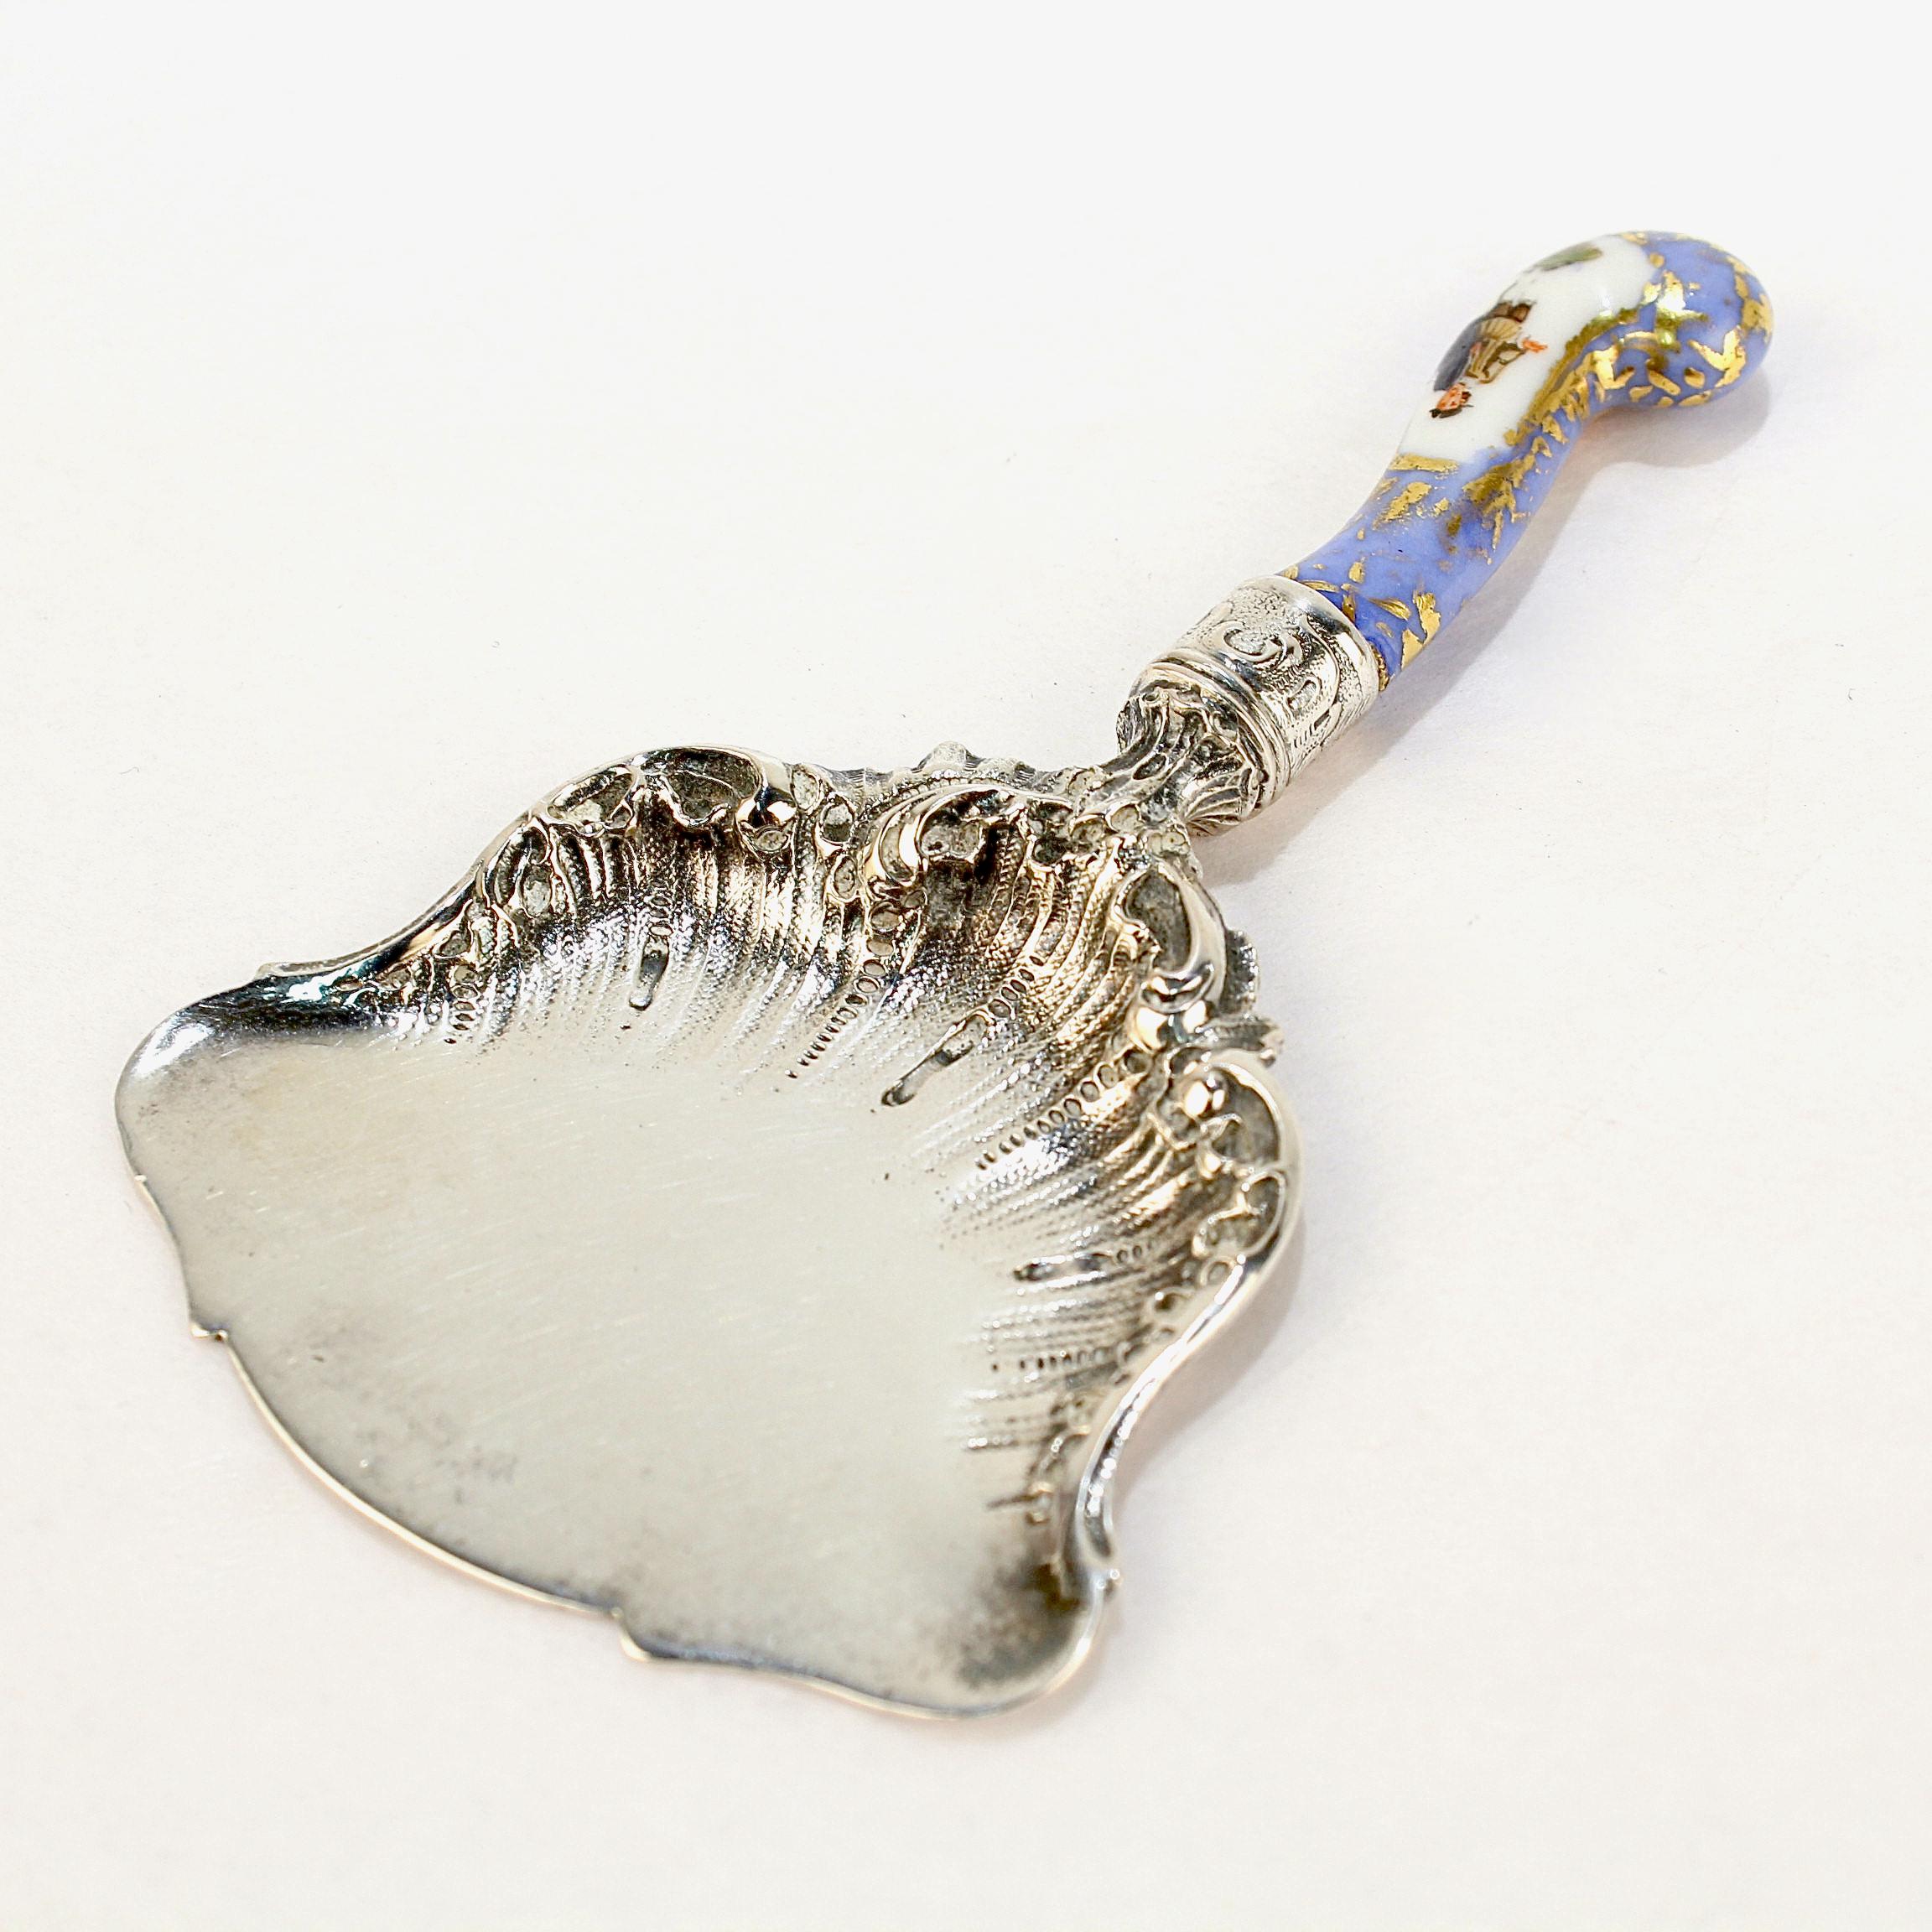 A fine antique Dresden nut scoop or petit four server.

Comprised of an ornate 800 silver scoop and mounted with a hand-painted Dresden porcelain handle. 

Marked for Richard Garten of Dresden, Germany, who was active in the 2nd half of the 19th